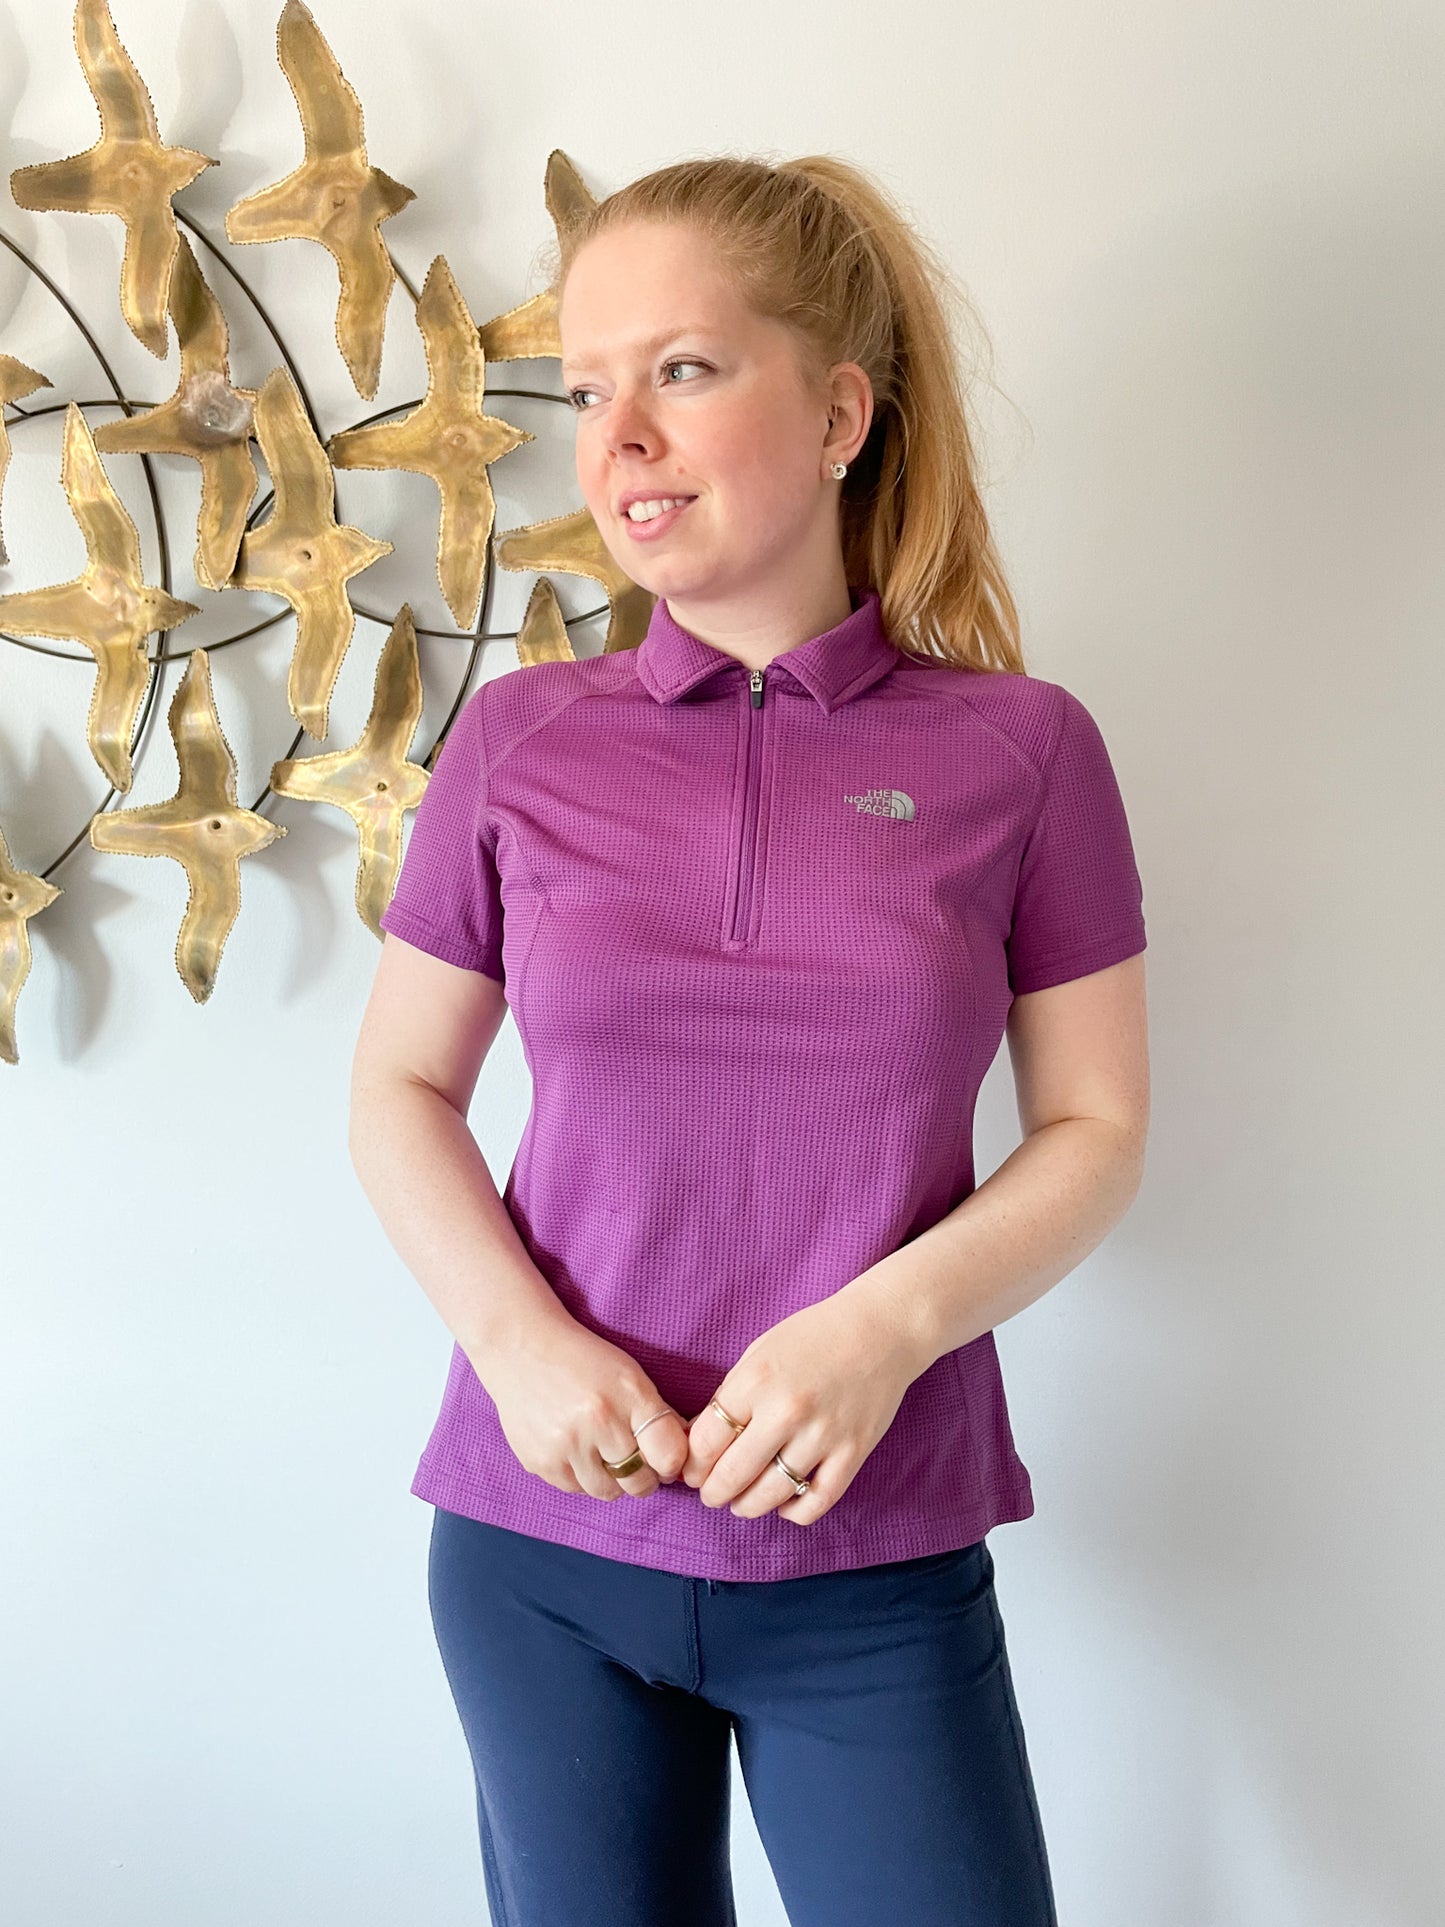 The North Face Purple Waffle Knit Performance Golf Polo Top - Medium